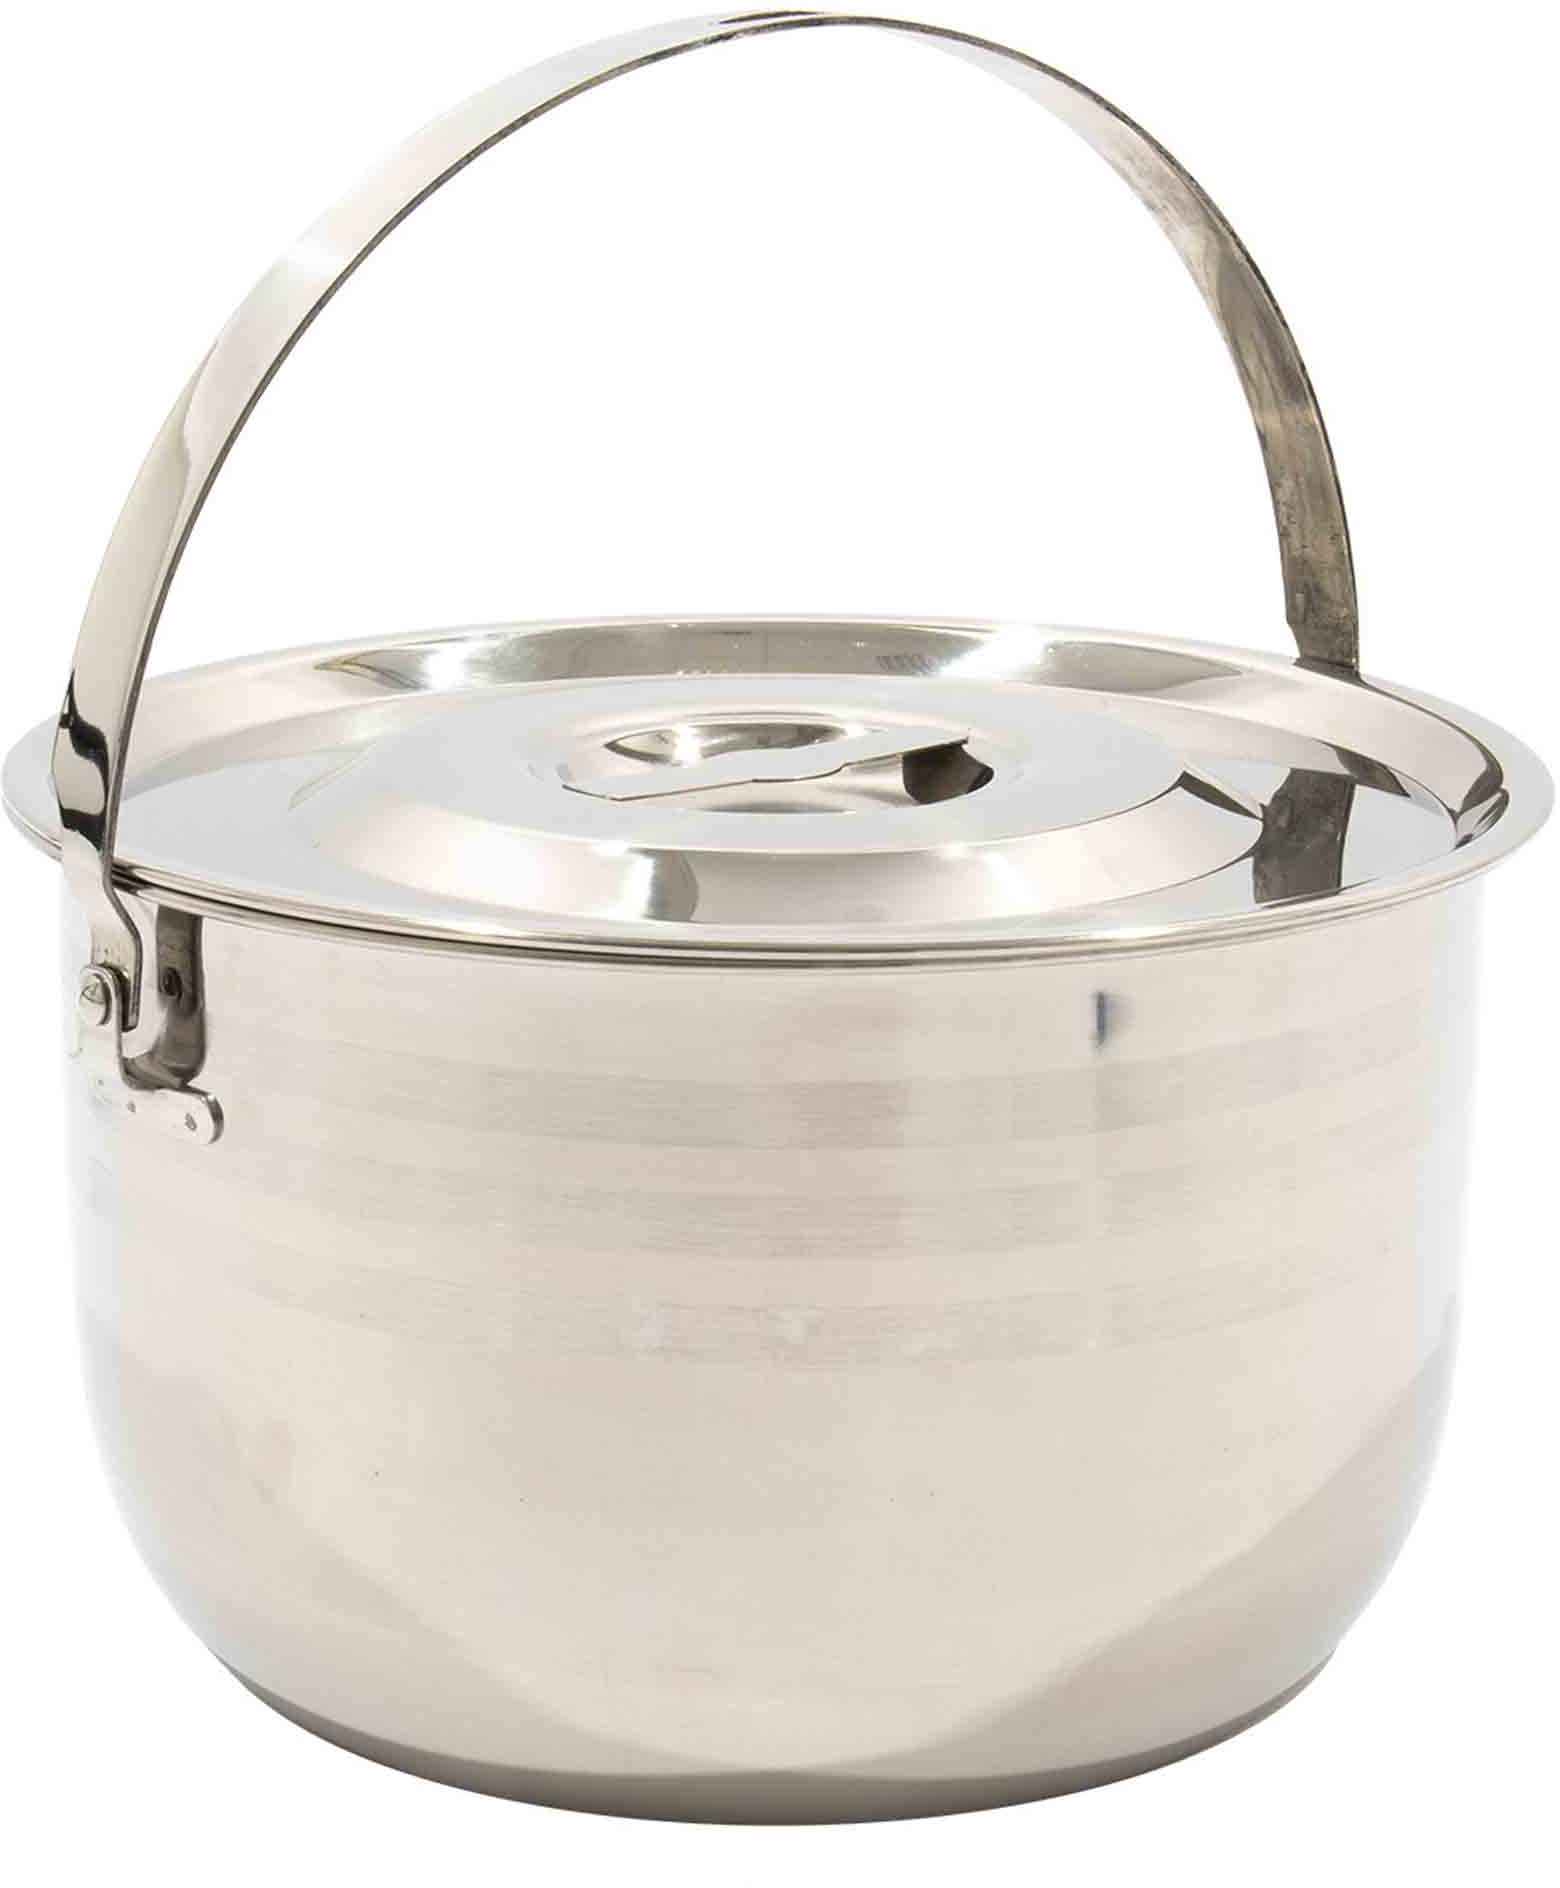 Pot with a lid